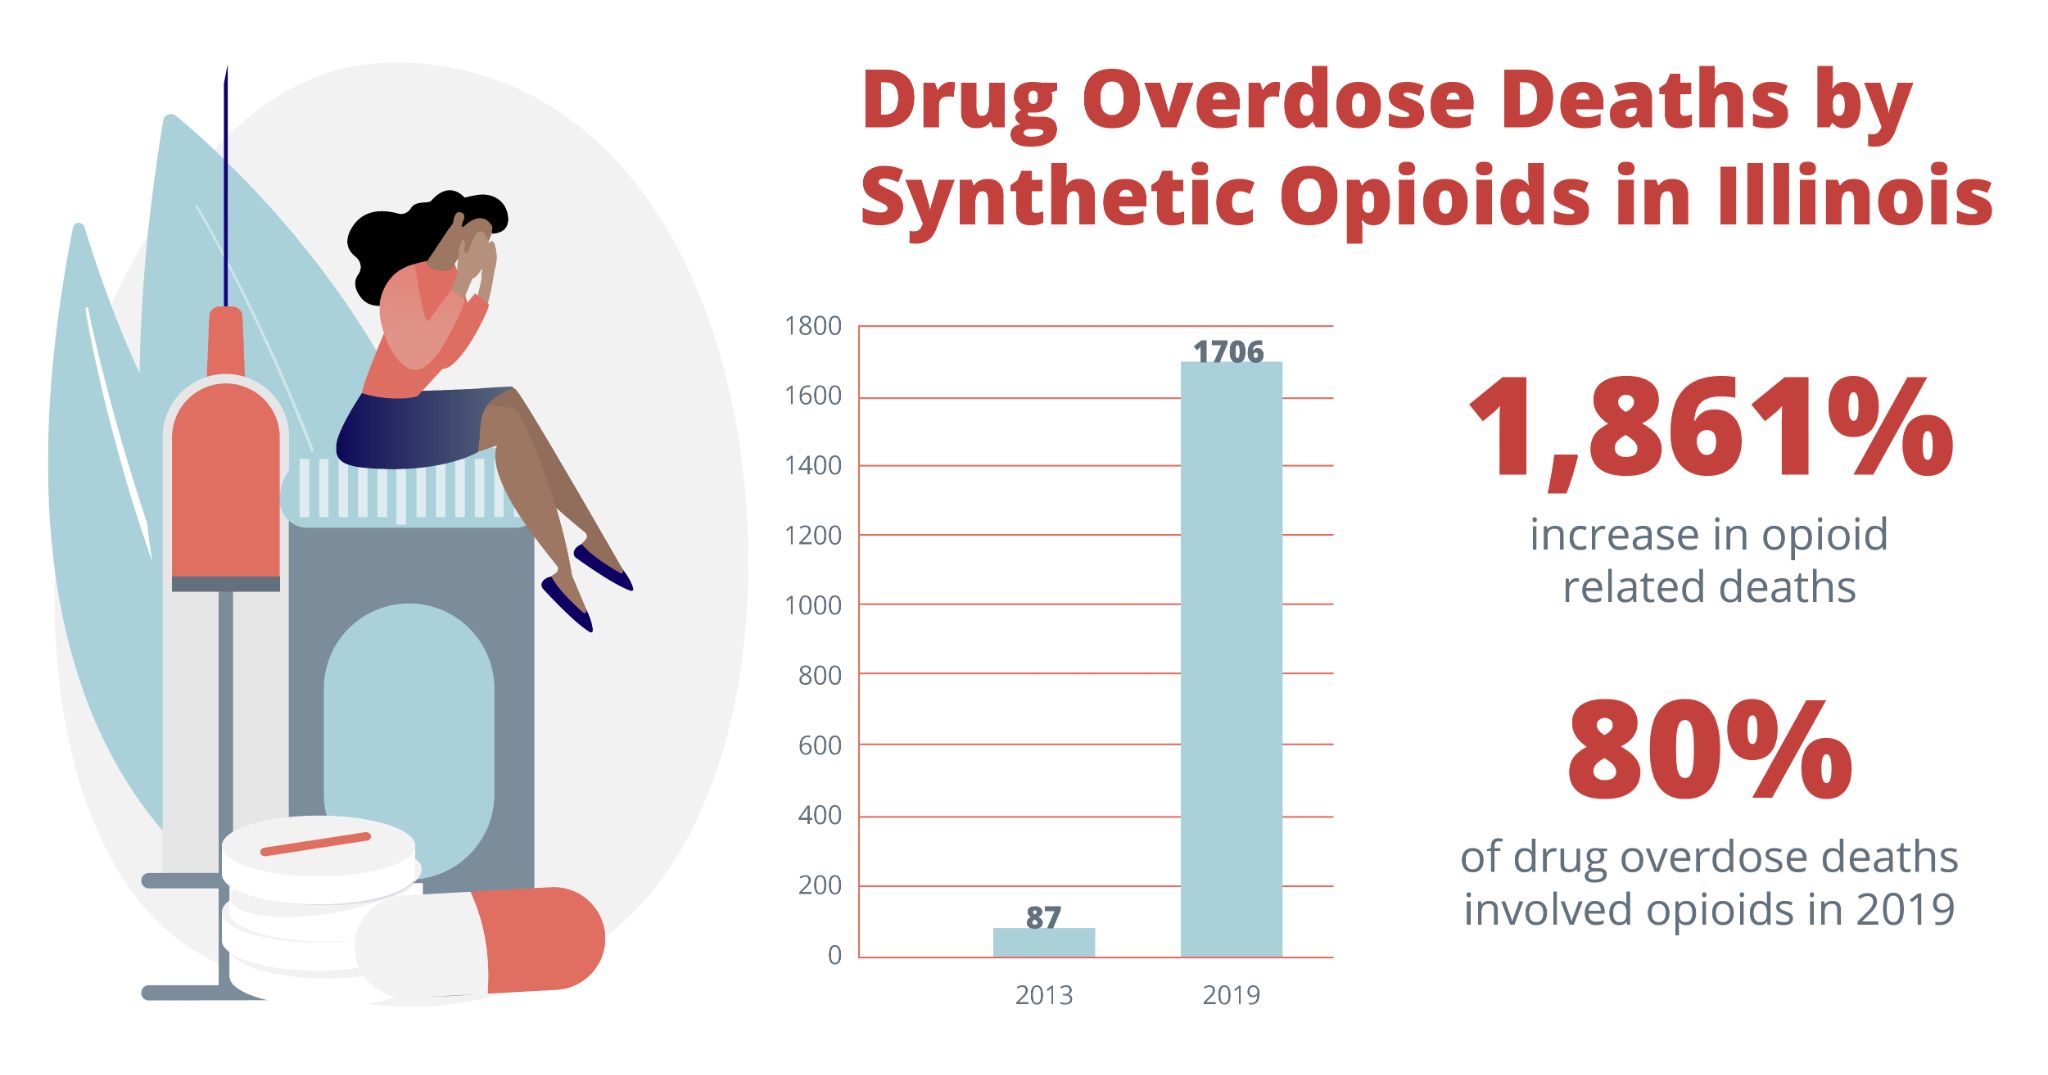 Drug overdose deaths by synthetic opioids in illinois. 1,861% increase in opioid related deaths. 80% of drug overdose deaths involved opioids in 2019.